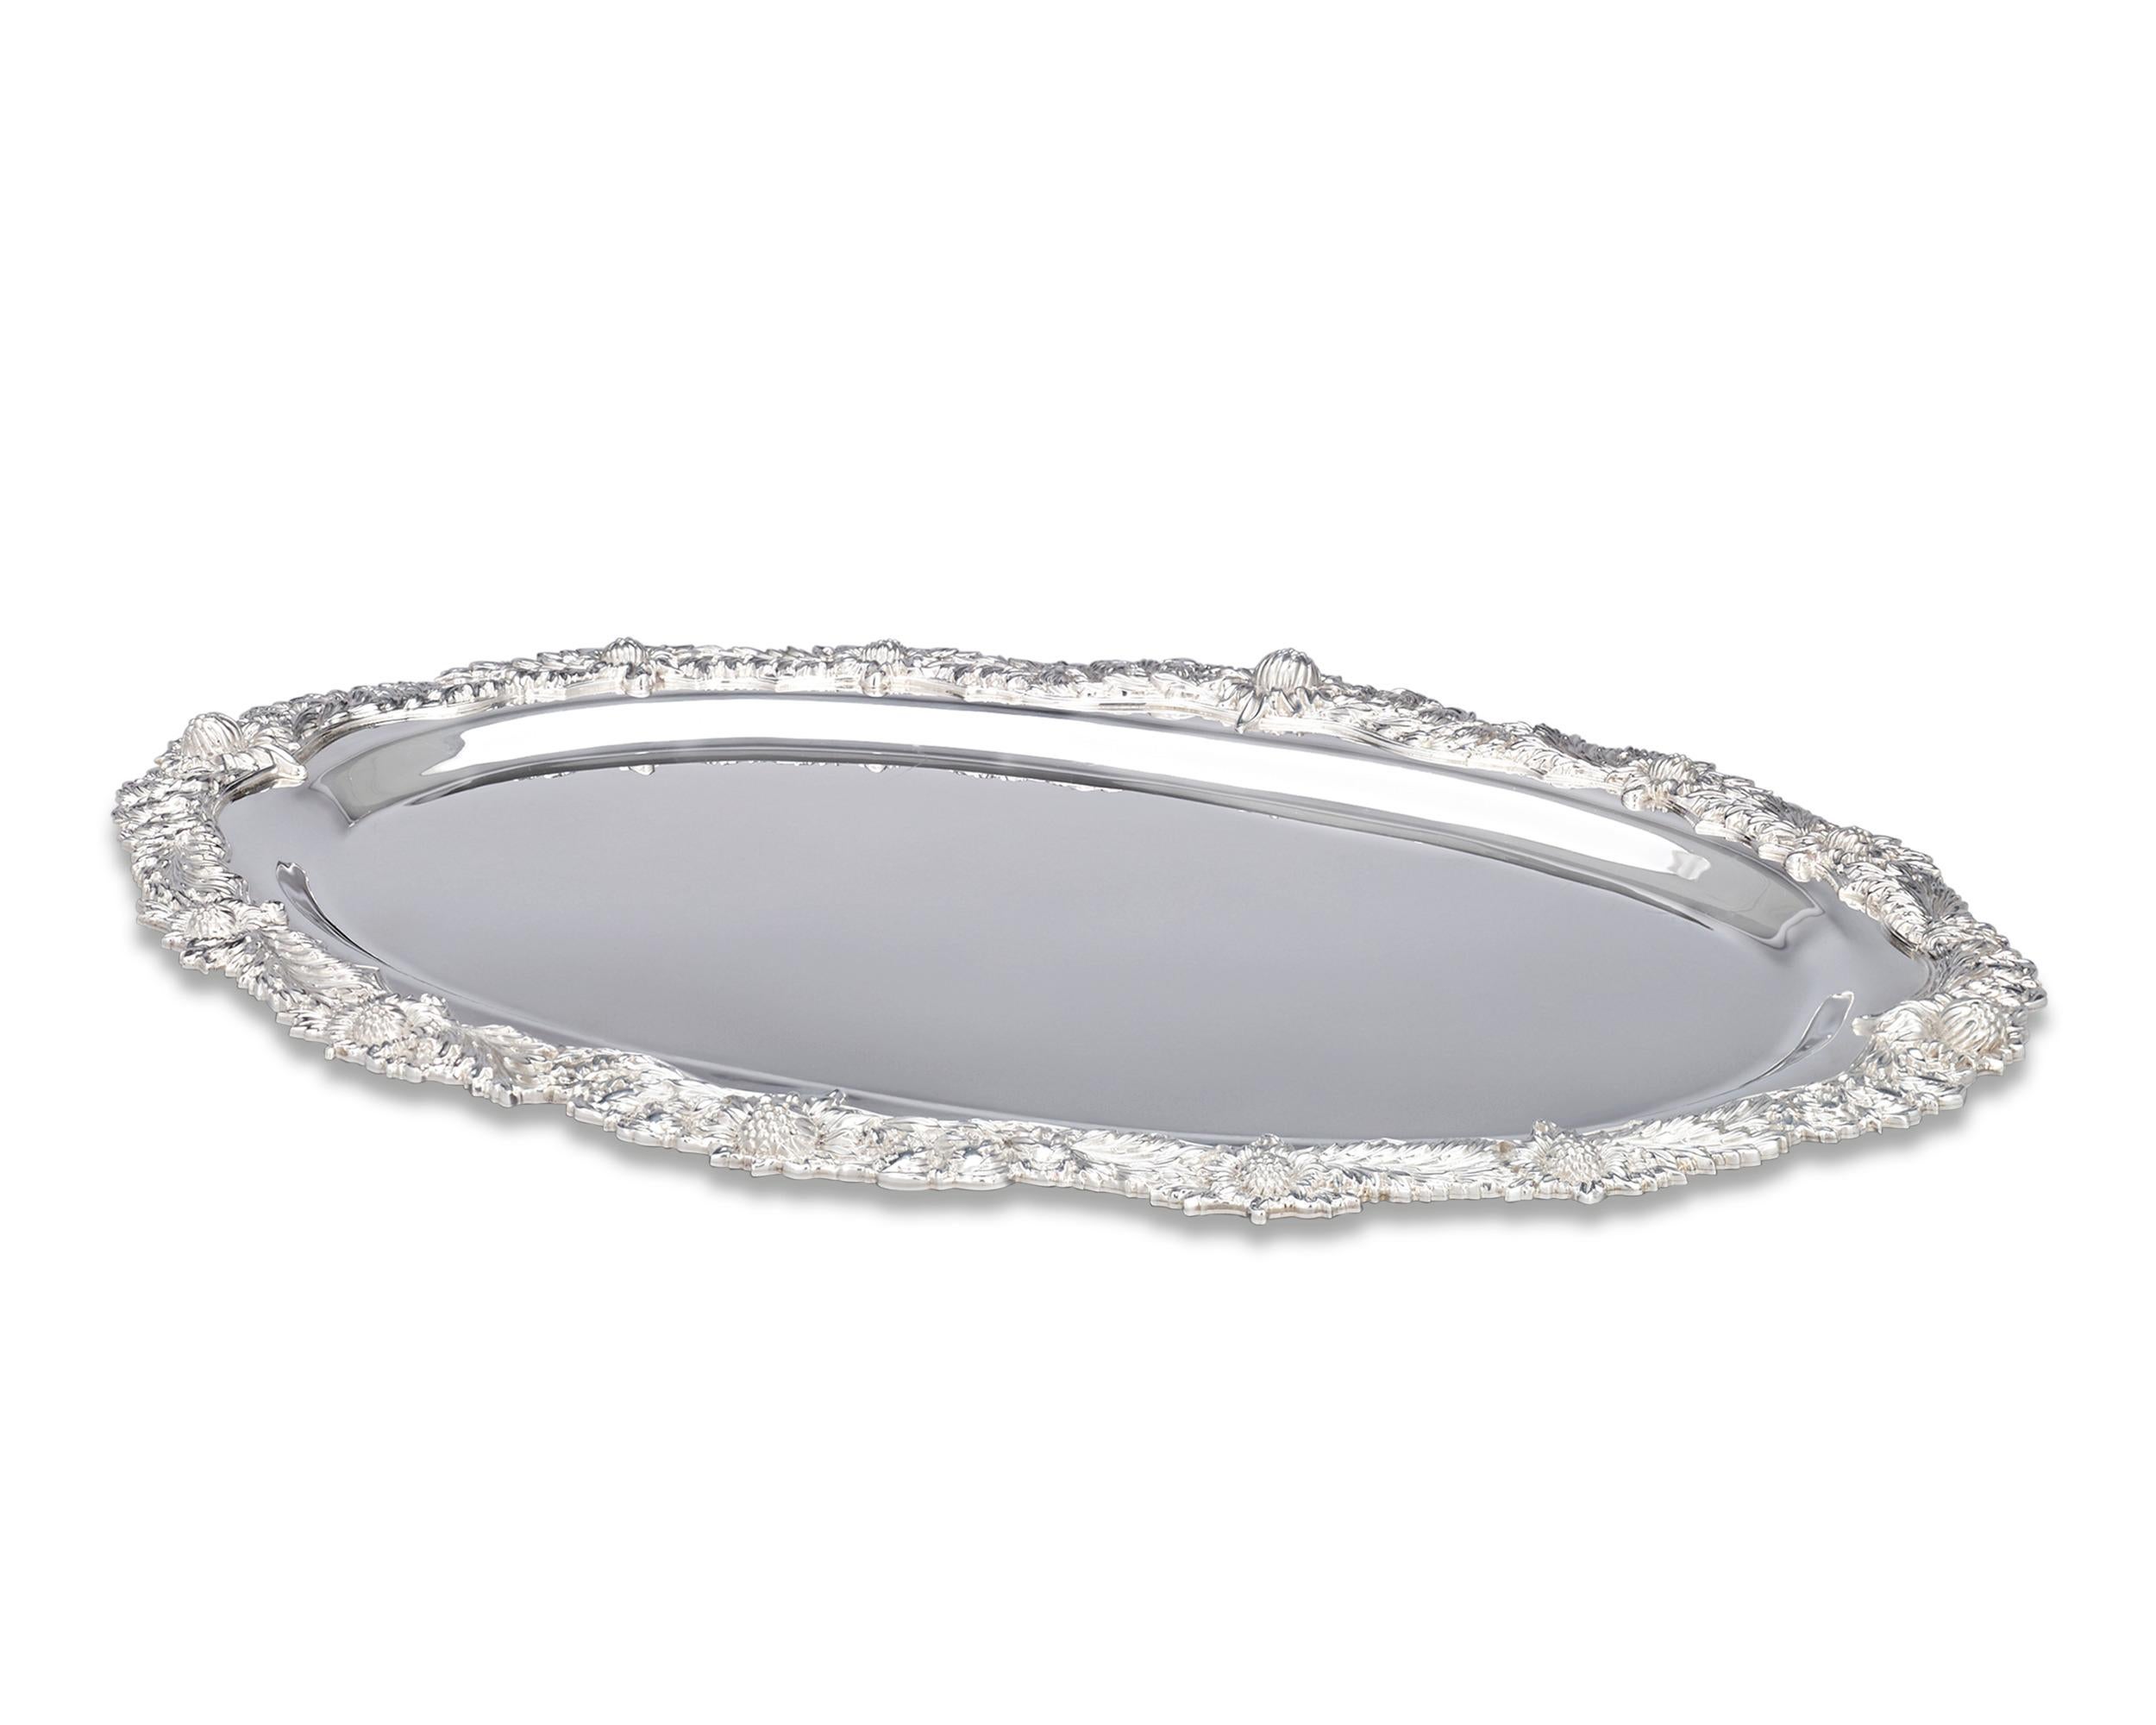 Masterfully executed in the highly popular Chrysanthemum pattern, this elegant dish exemplifies the unmistakable artistry of Tiffany & Co. silver. An elaborate border of chrysanthemum blooms encircles the Classic design, which displays a remarkable